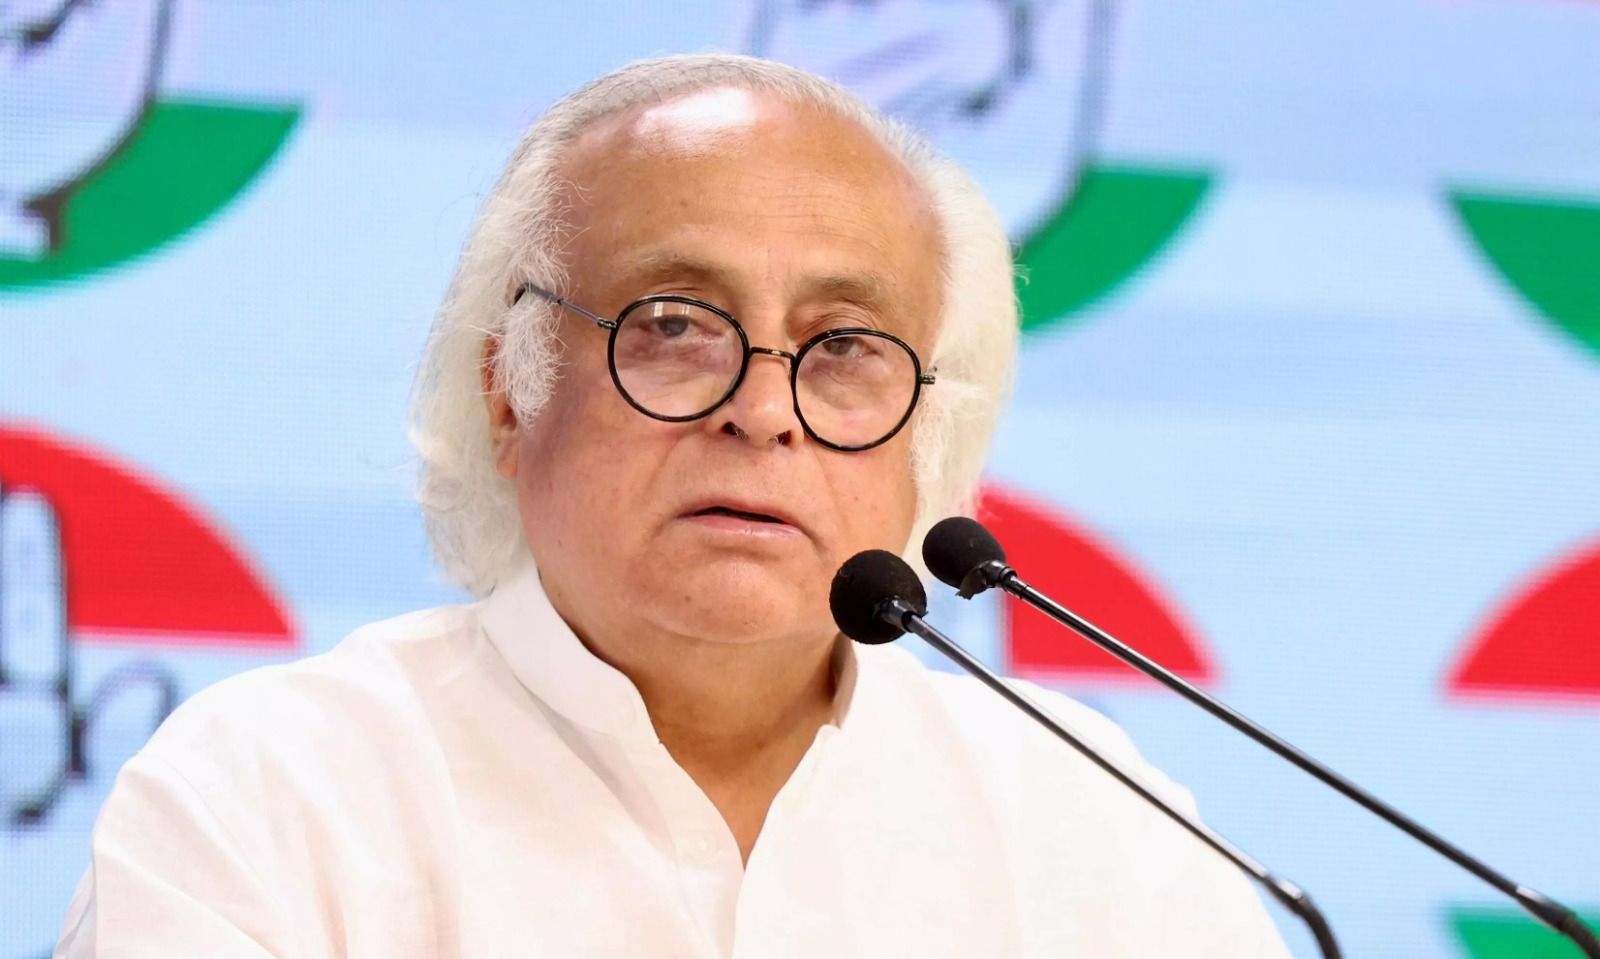 Things PM Modi doesn't tell people - Listed by Jairam Ramesh